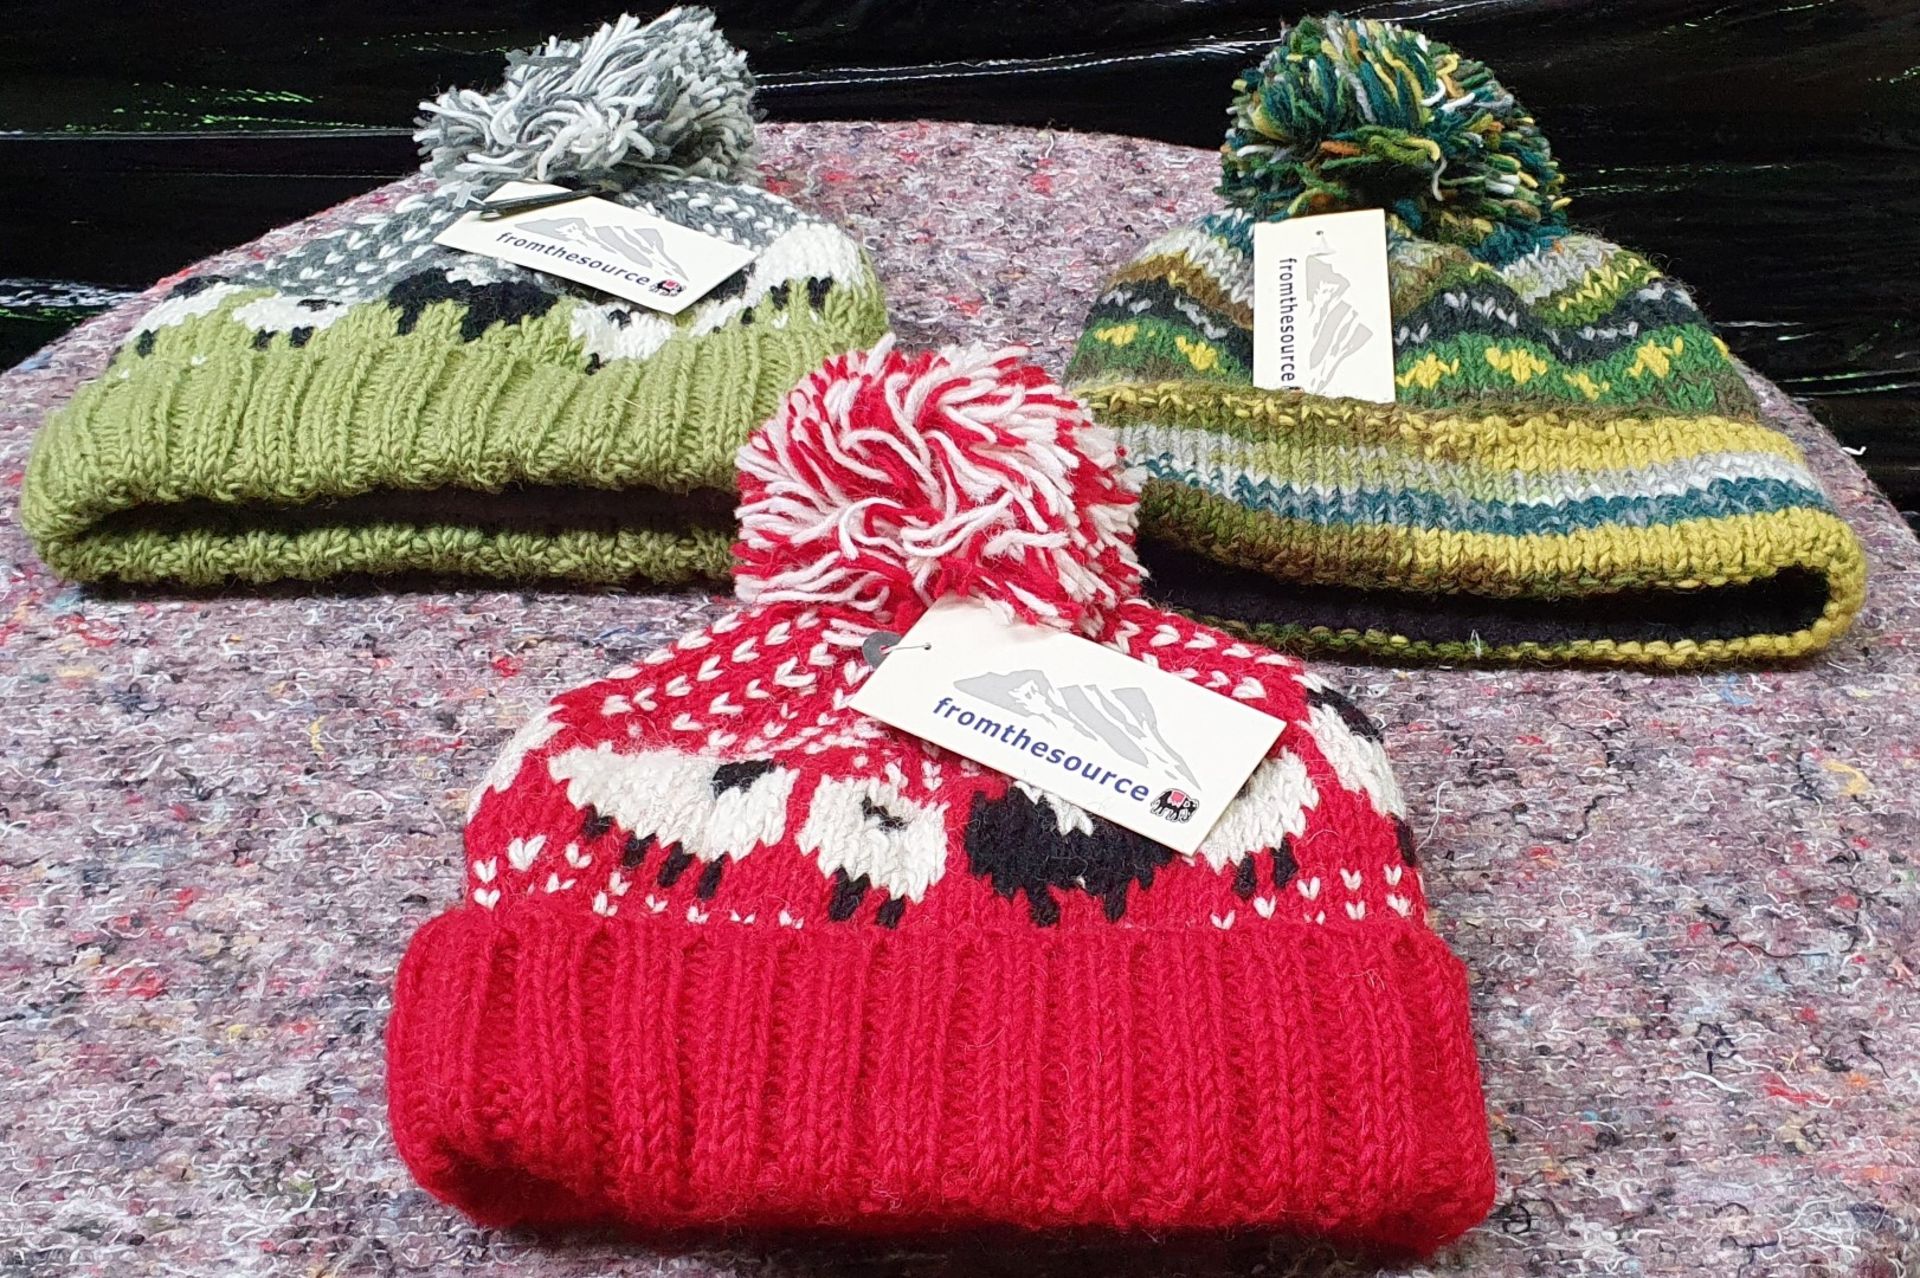 3 x Woolly Bobble Hats by From The Source - New Stock - RRP £49 - Ref: TCH237 - CL840 - Location: